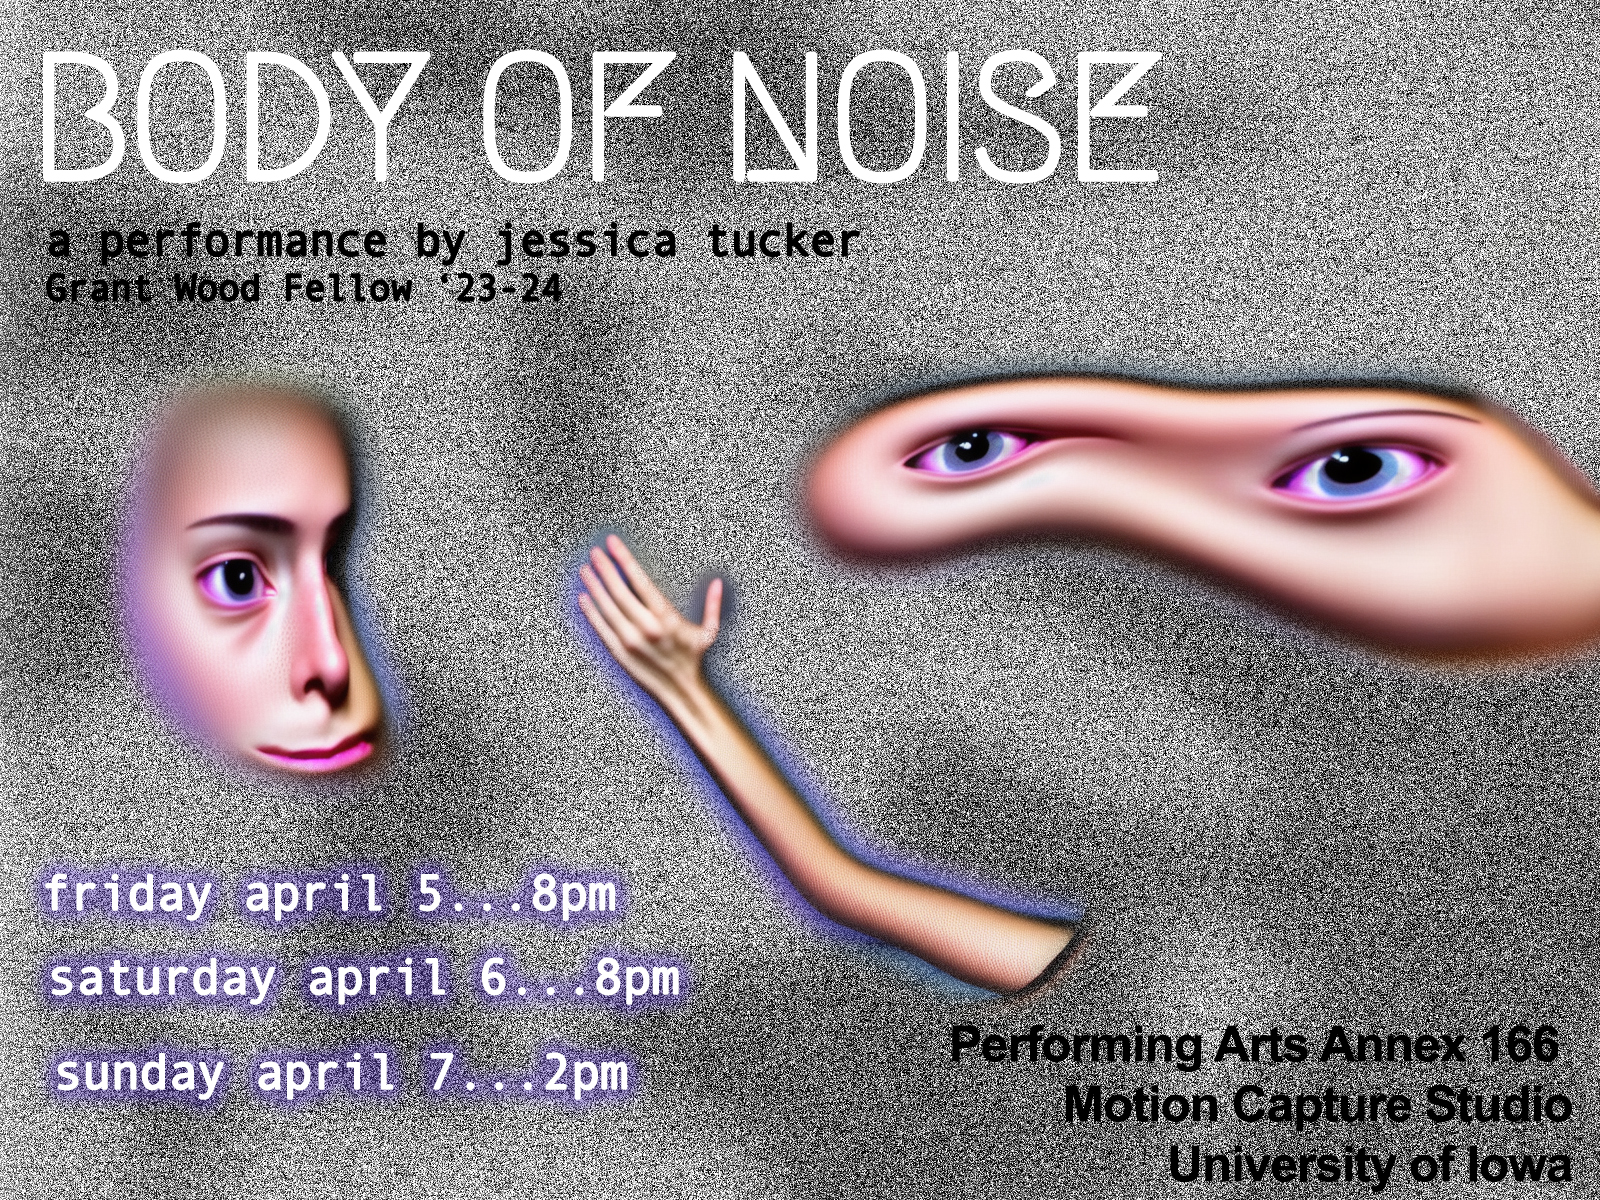 Body of Noise. By Grant Wood Fellow Jessica Tucker